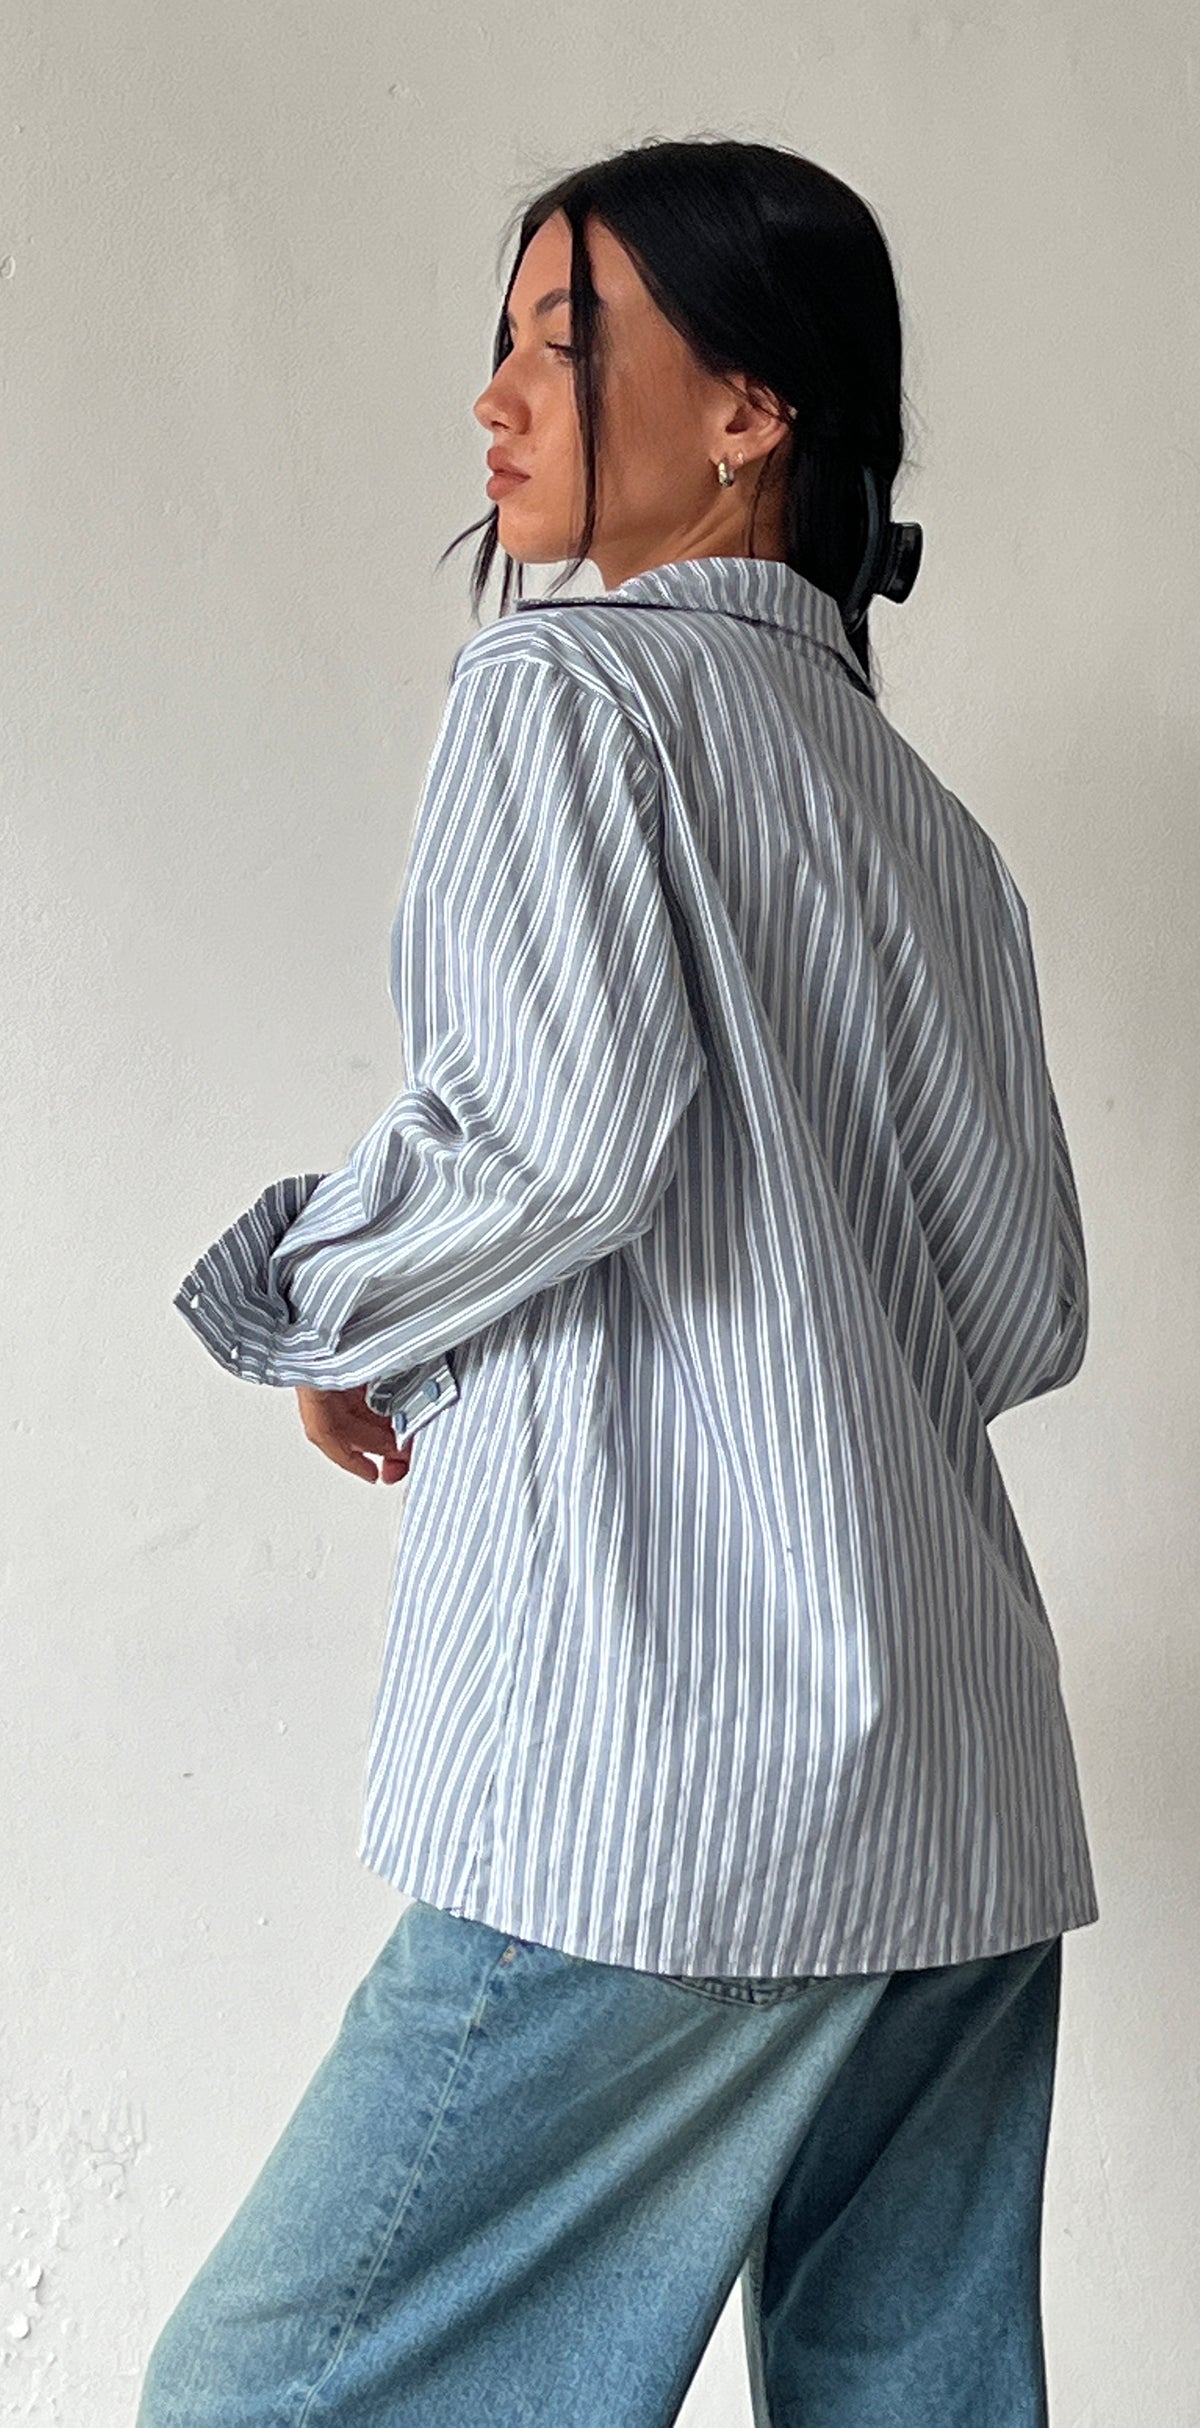 Turner Shirt in Grey and White Stripe with M Embroidery | Turner ...